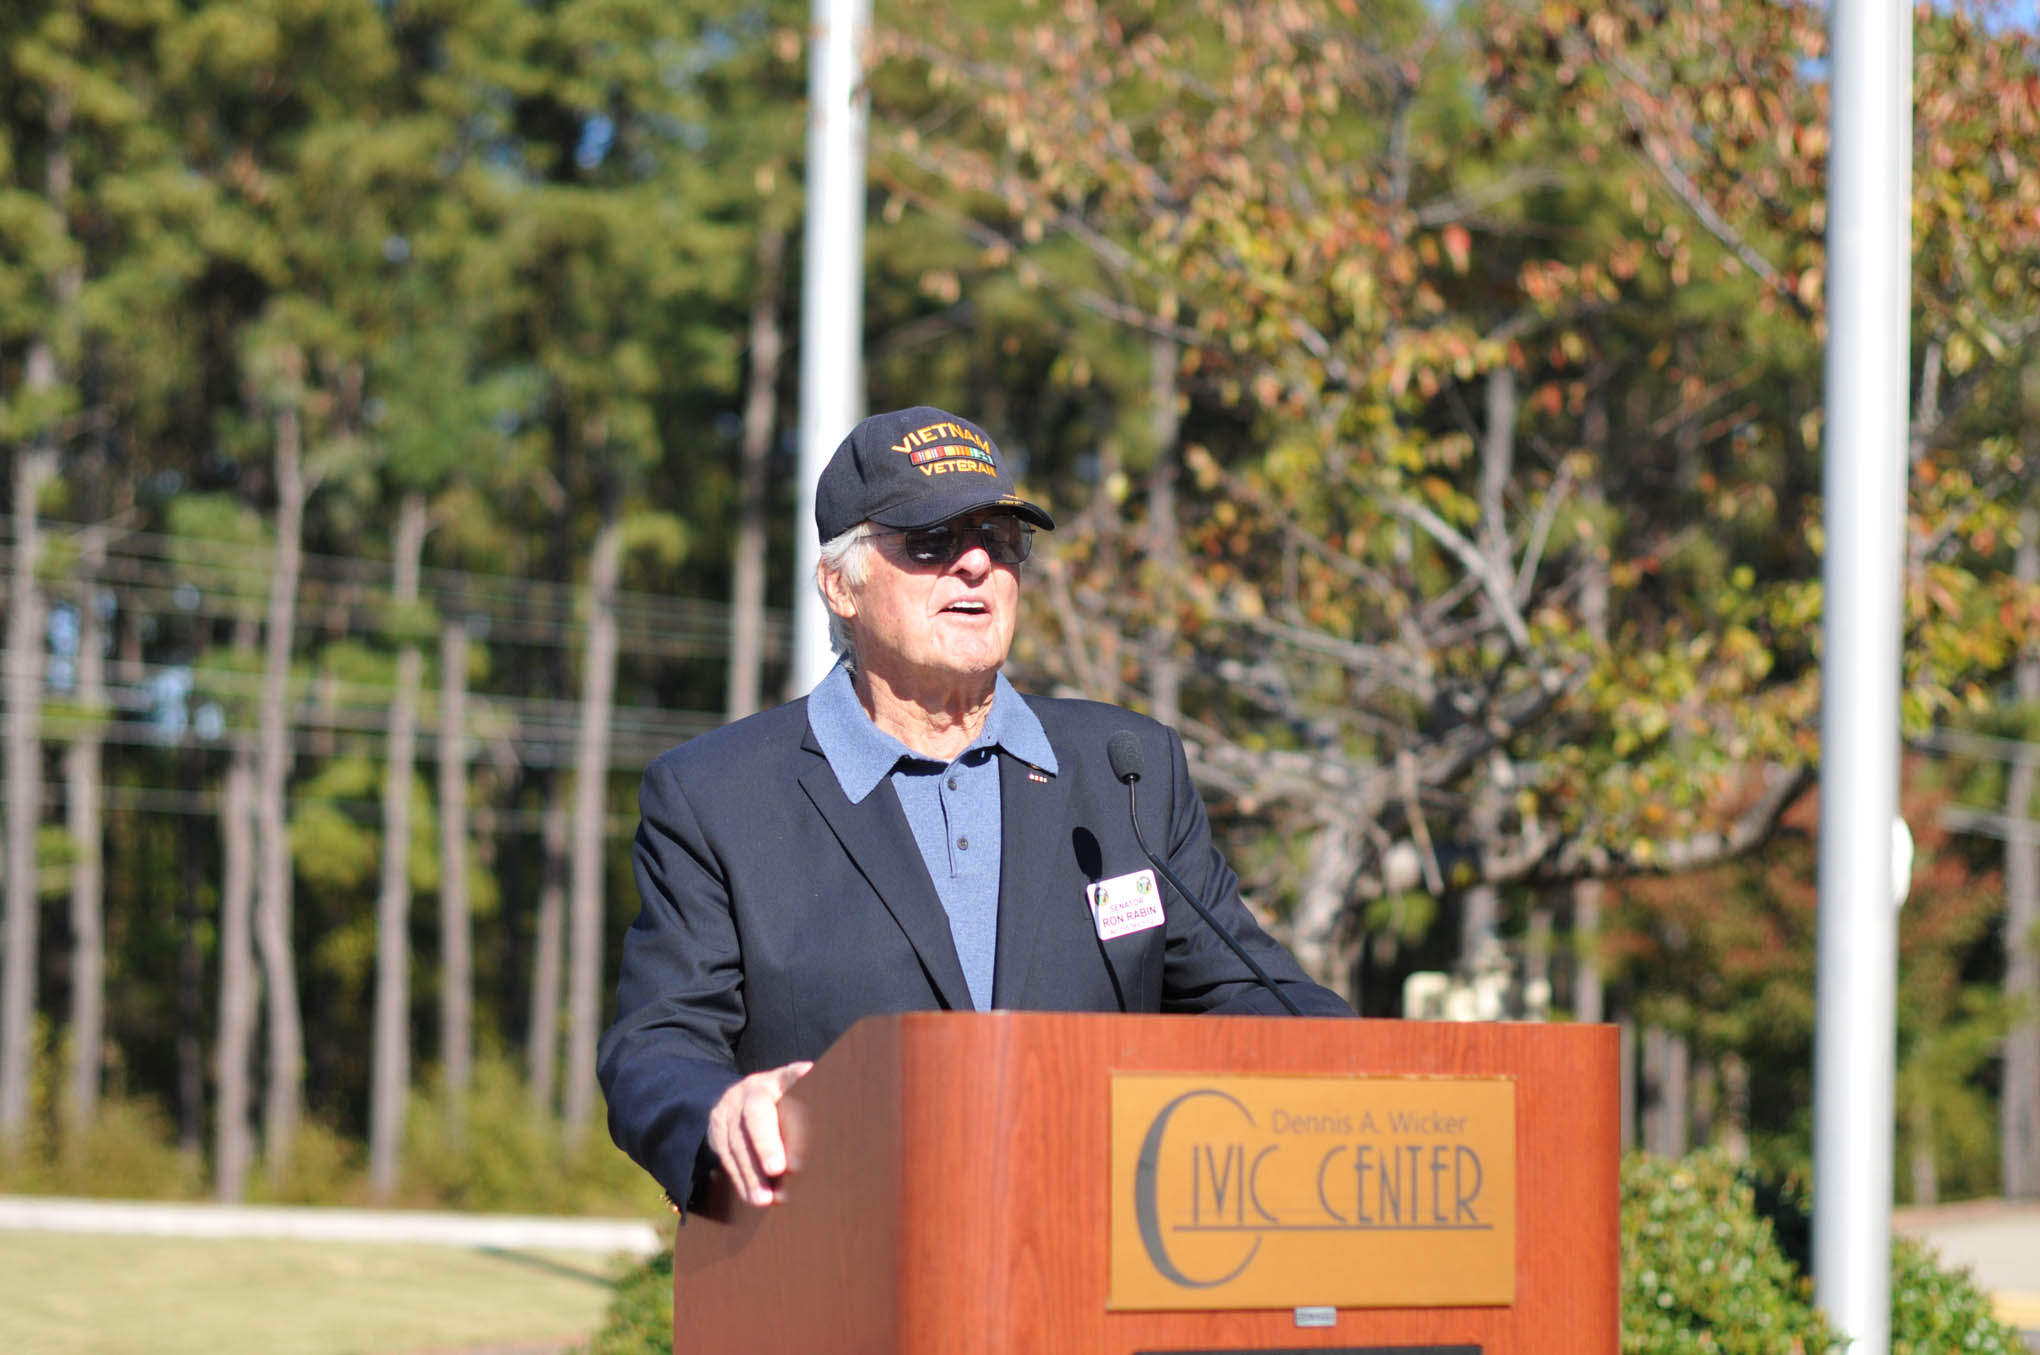 Click to enlarge,  Colonel (Ret.) Ronald Rabin, who serves as a member of the North Carolina Senate, provided opening remarks at the Veterans Day observance on Thursday, Nov. 10, at the Dennis A. Wicker Civic Center. 